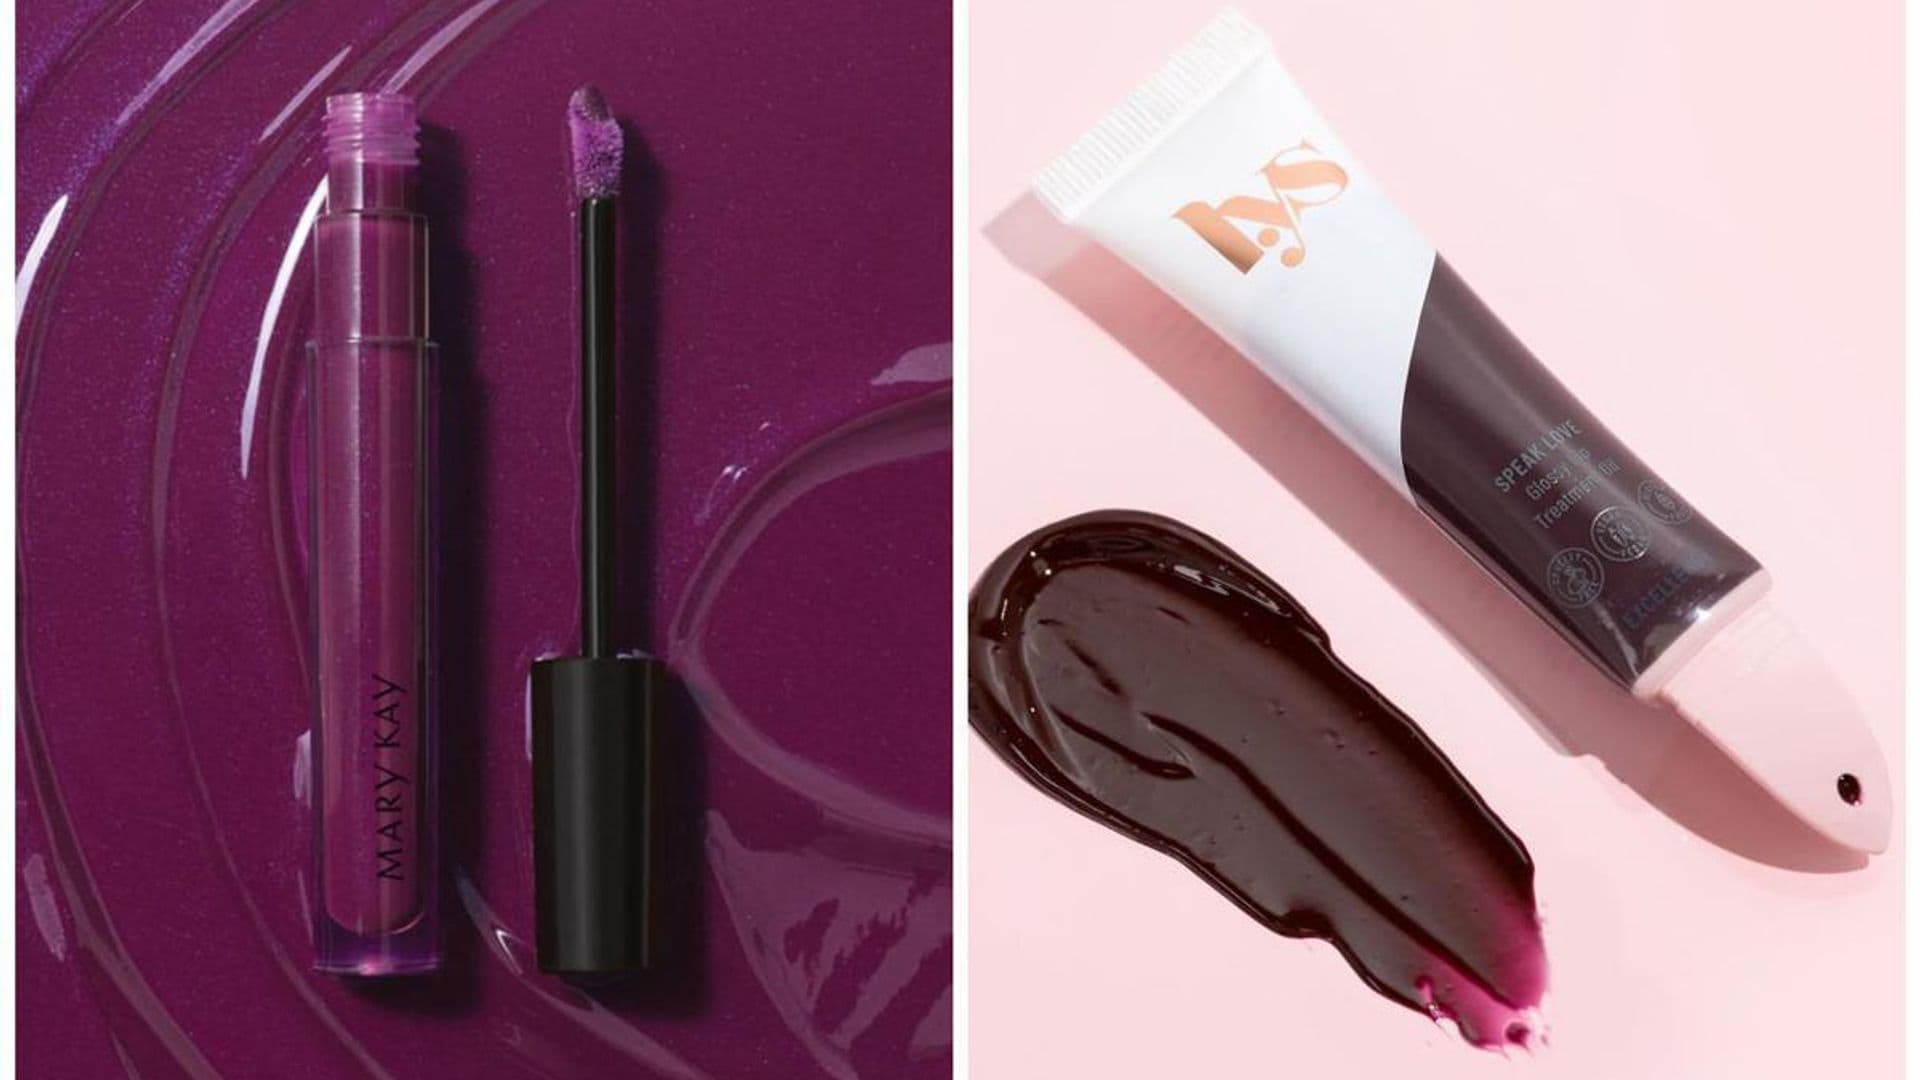 Nude, plum, brown? Bold lip colors are trending this fall